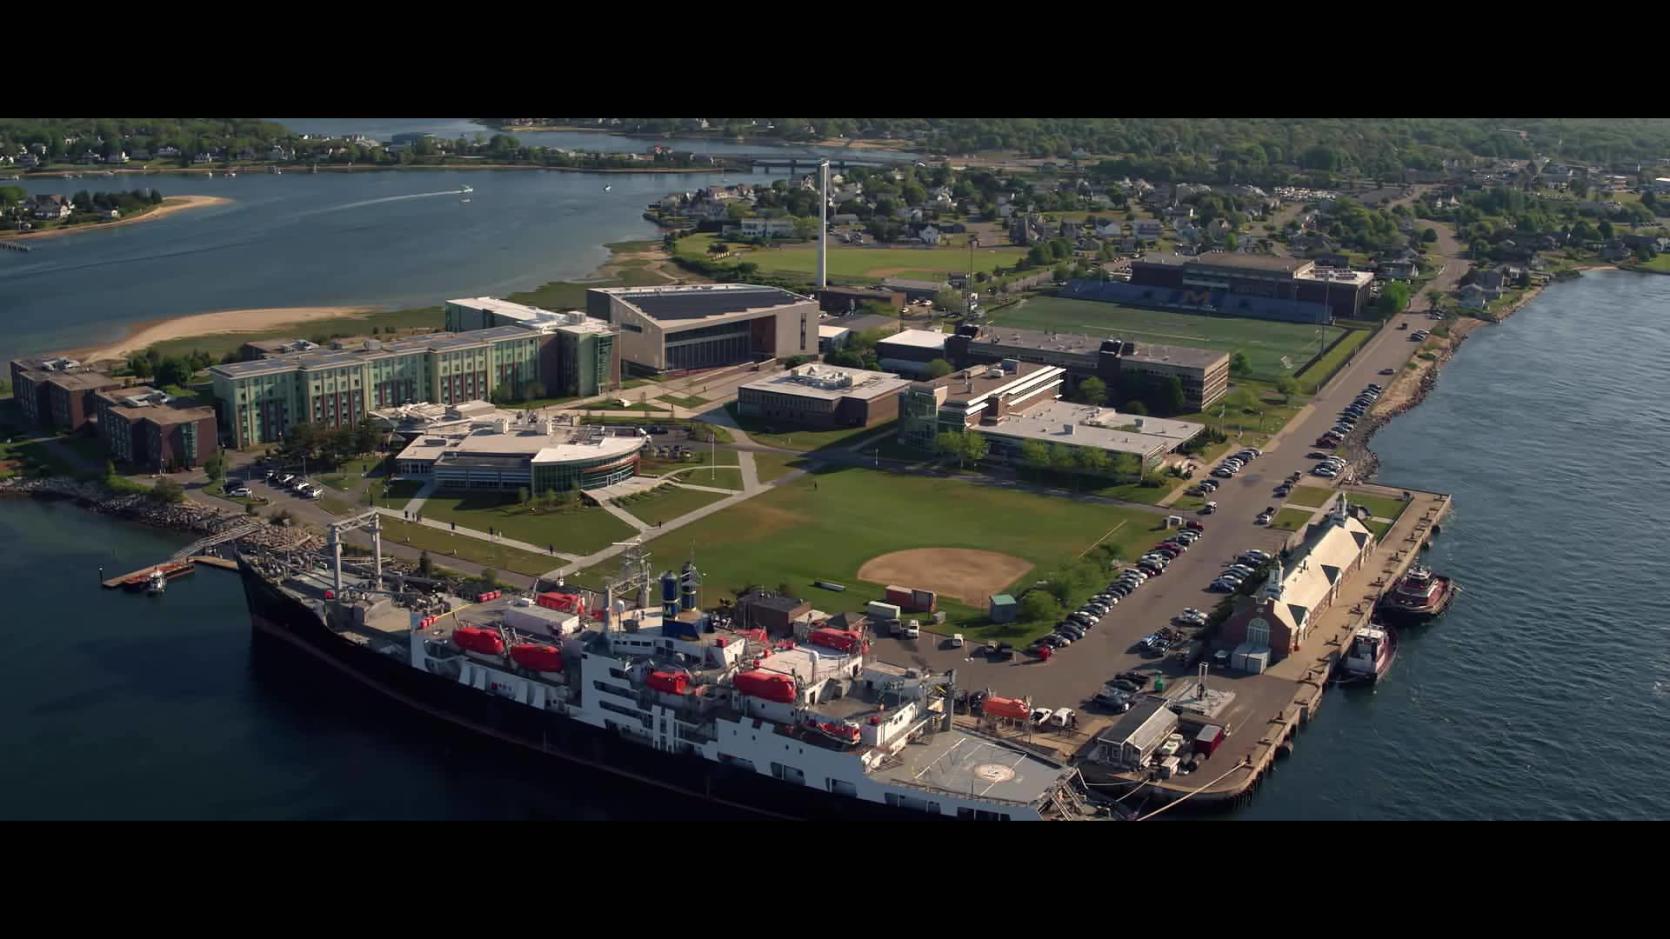 Aerial view of Mass Maritime campus